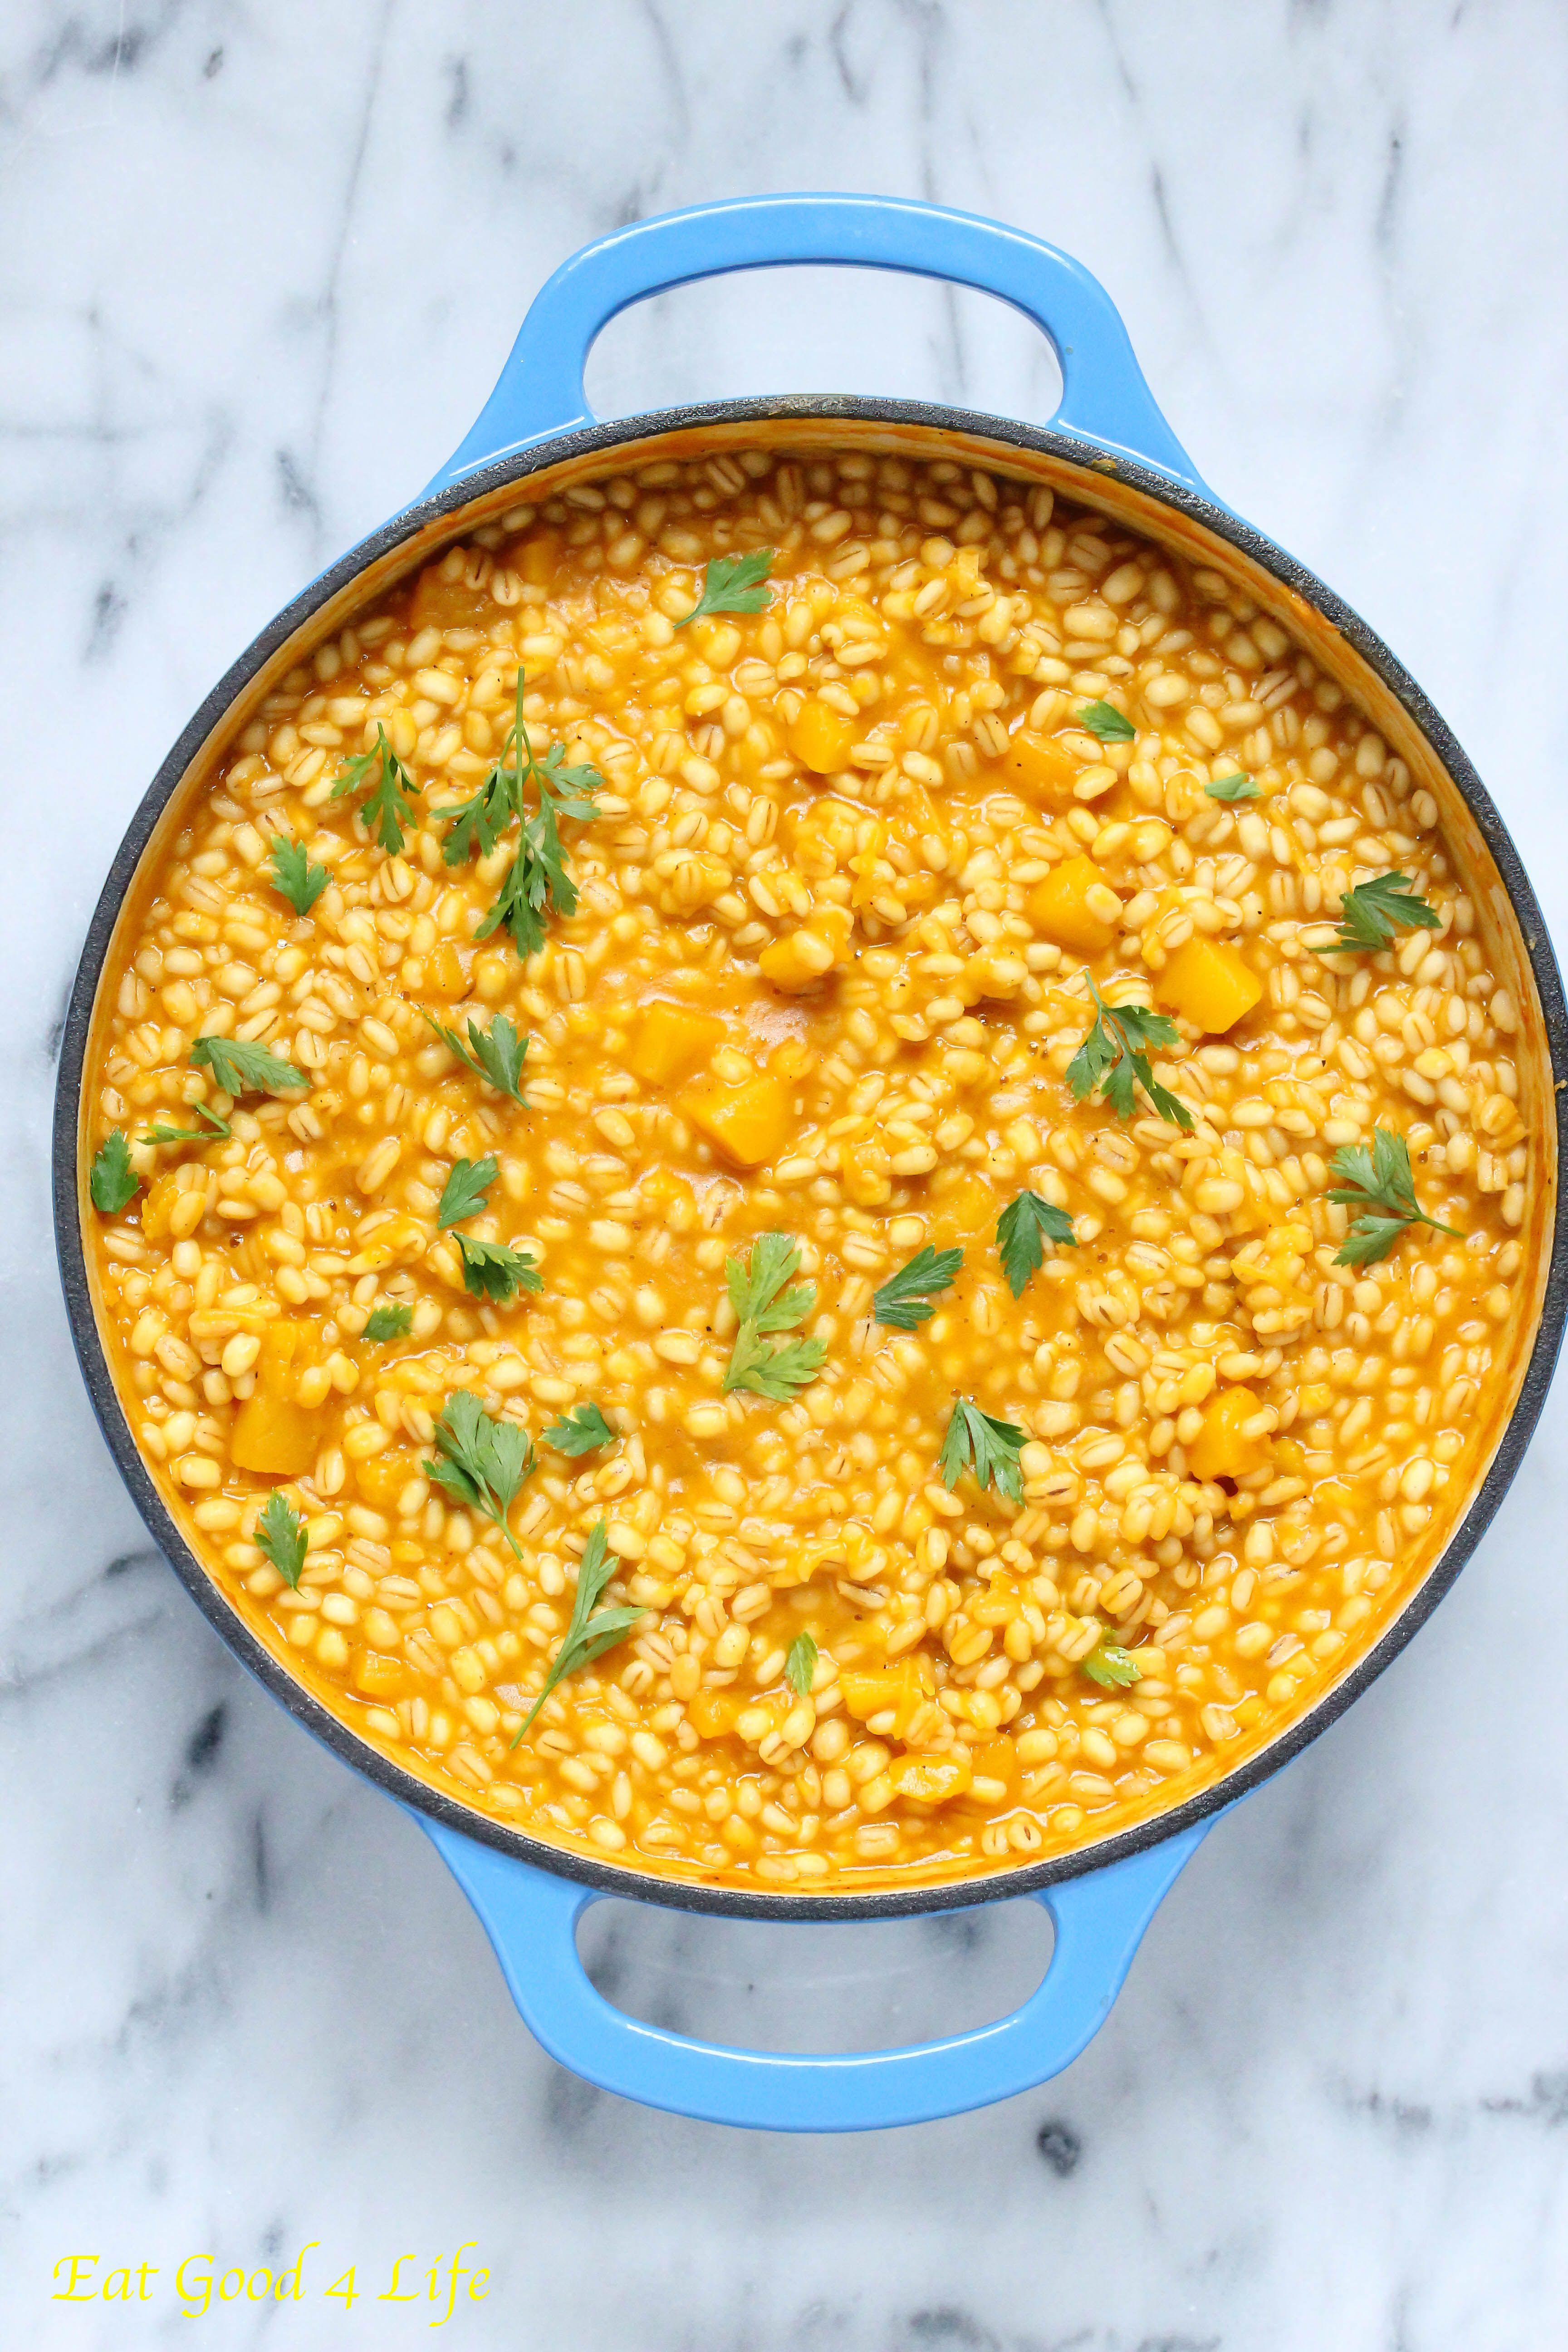 Pumpkin barley risotto made healthier than regular versions. This one is got tons of flavor with hardly any calories added!